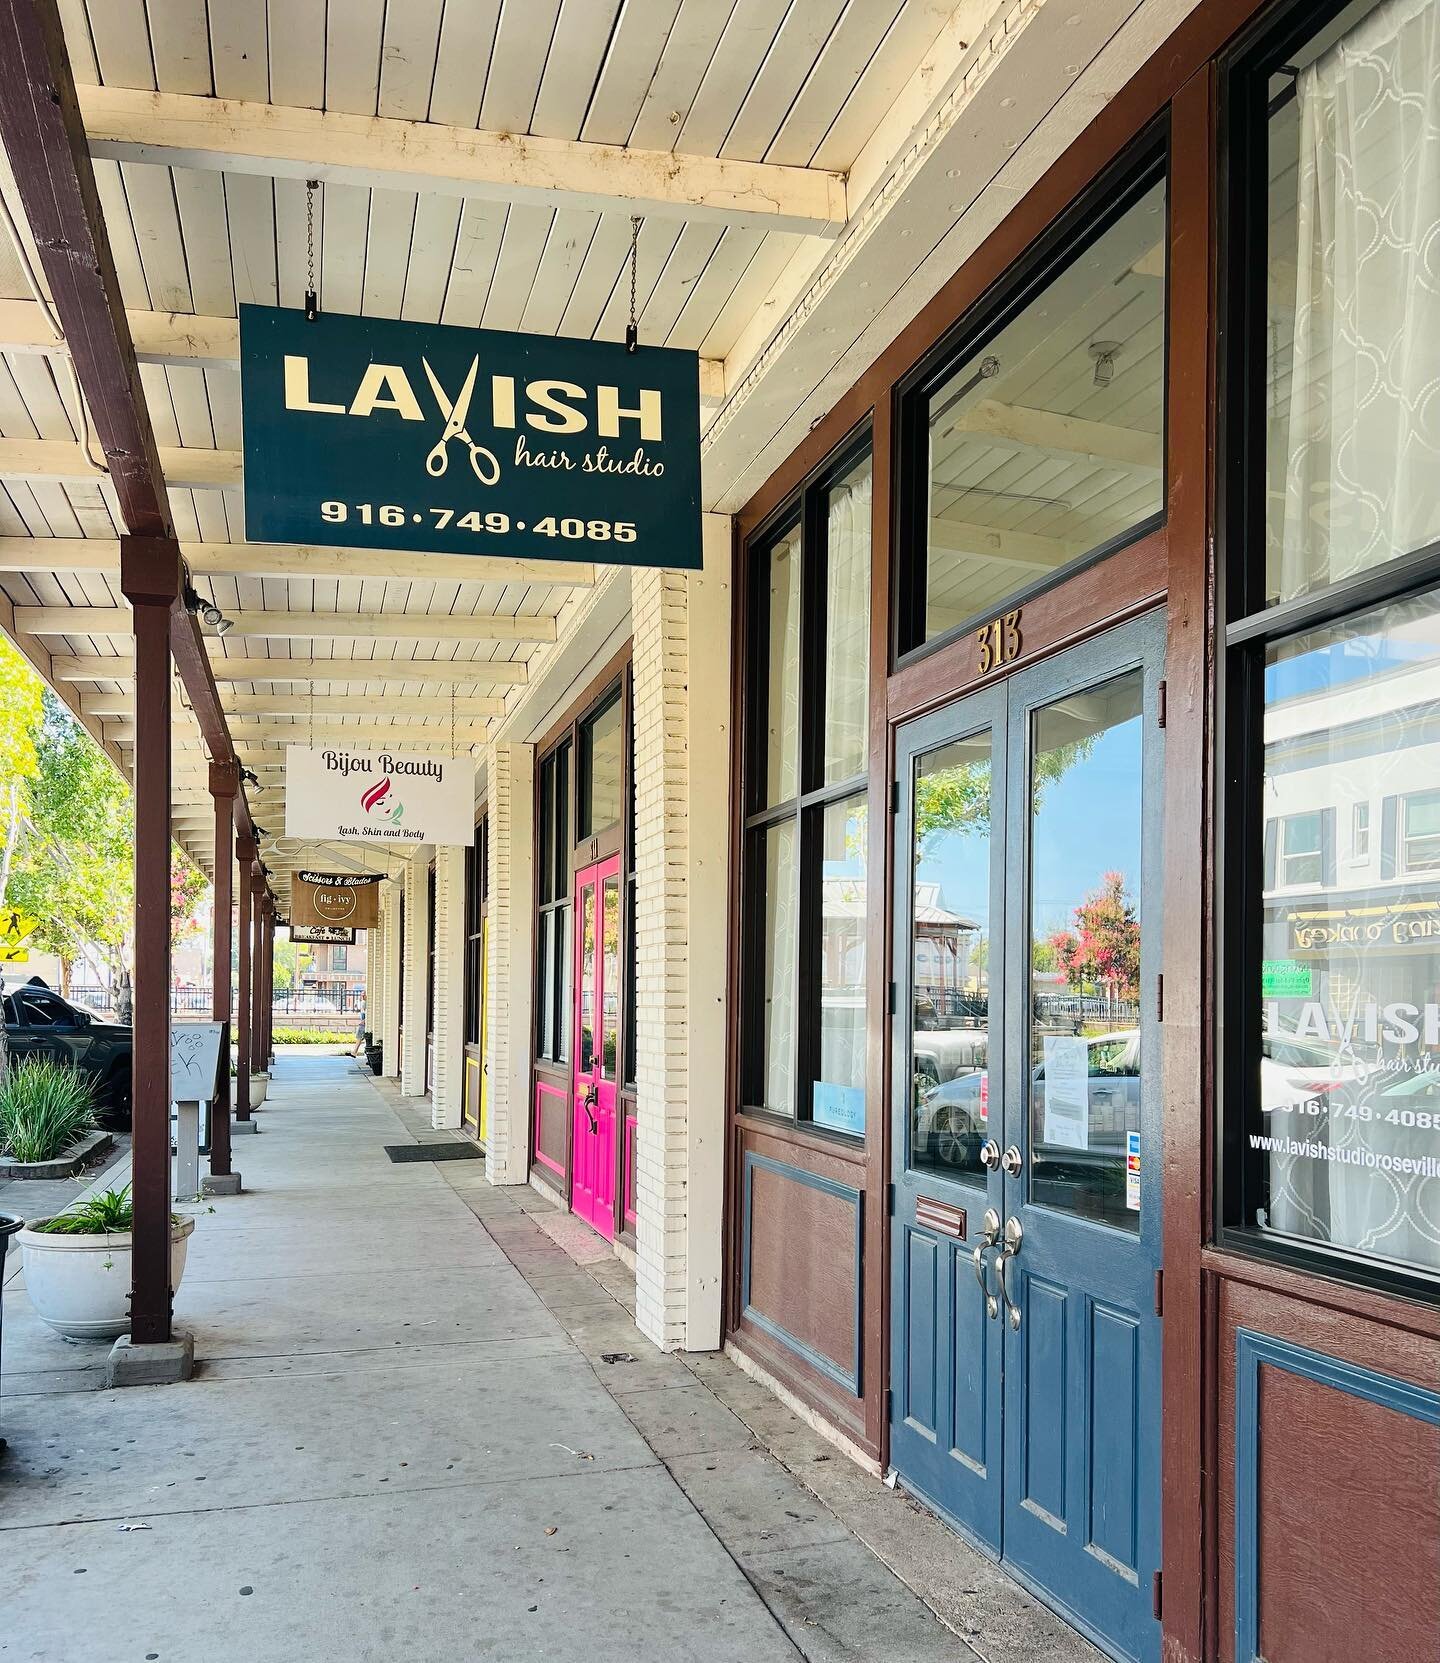 Hello beautiful clients and friends! If you or anyone you know is looking for a new salon home with a fun group of people to work with,let me know! Lavish Hair Studio has 2 stations available for rental or commission positions. The rent will include 